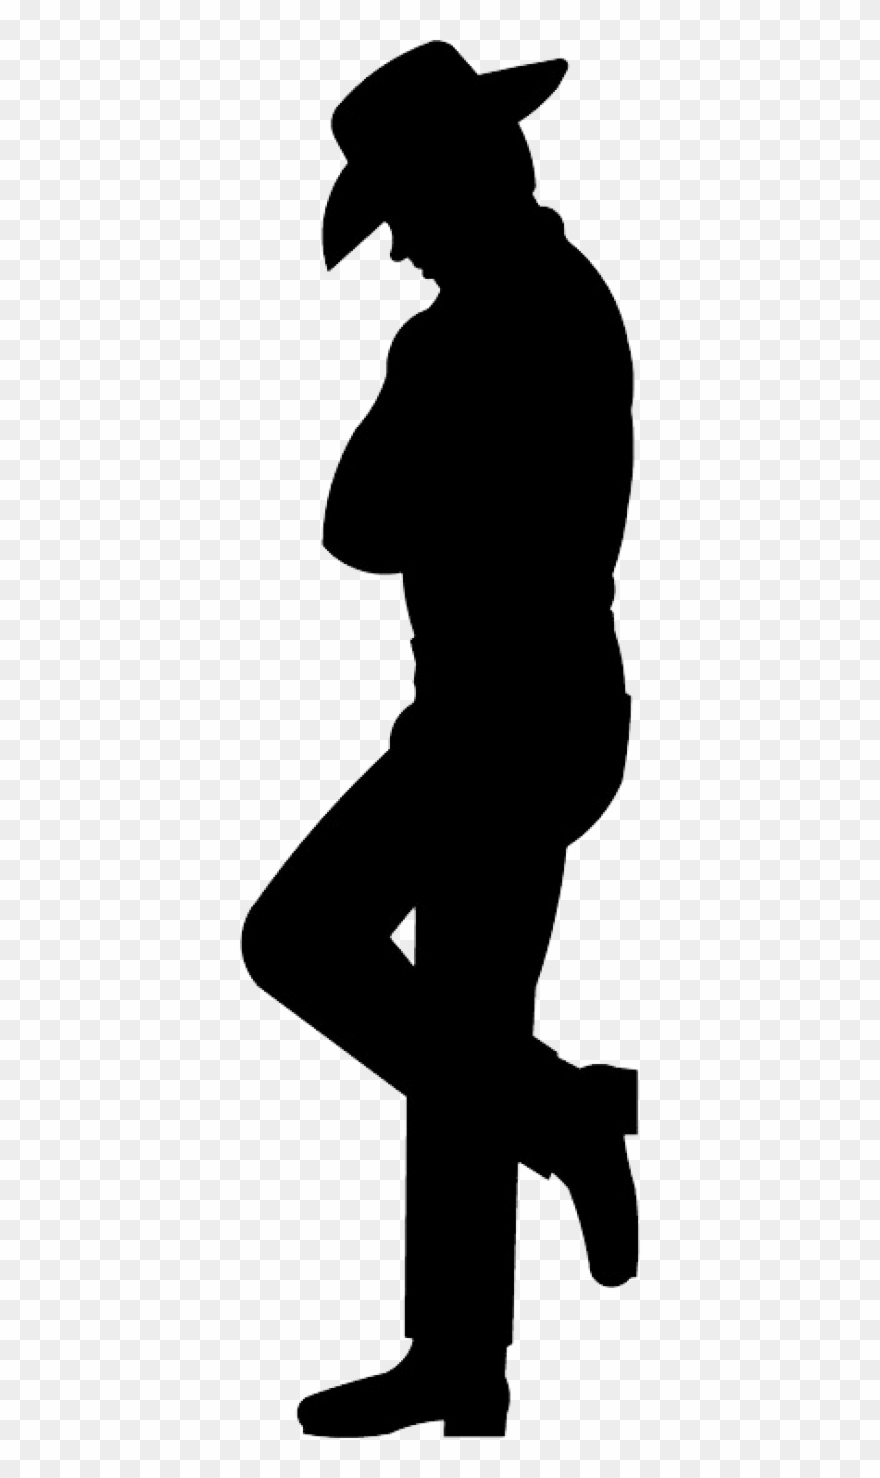 Cowboy Silhouette Png, Download Png Image With Transparent